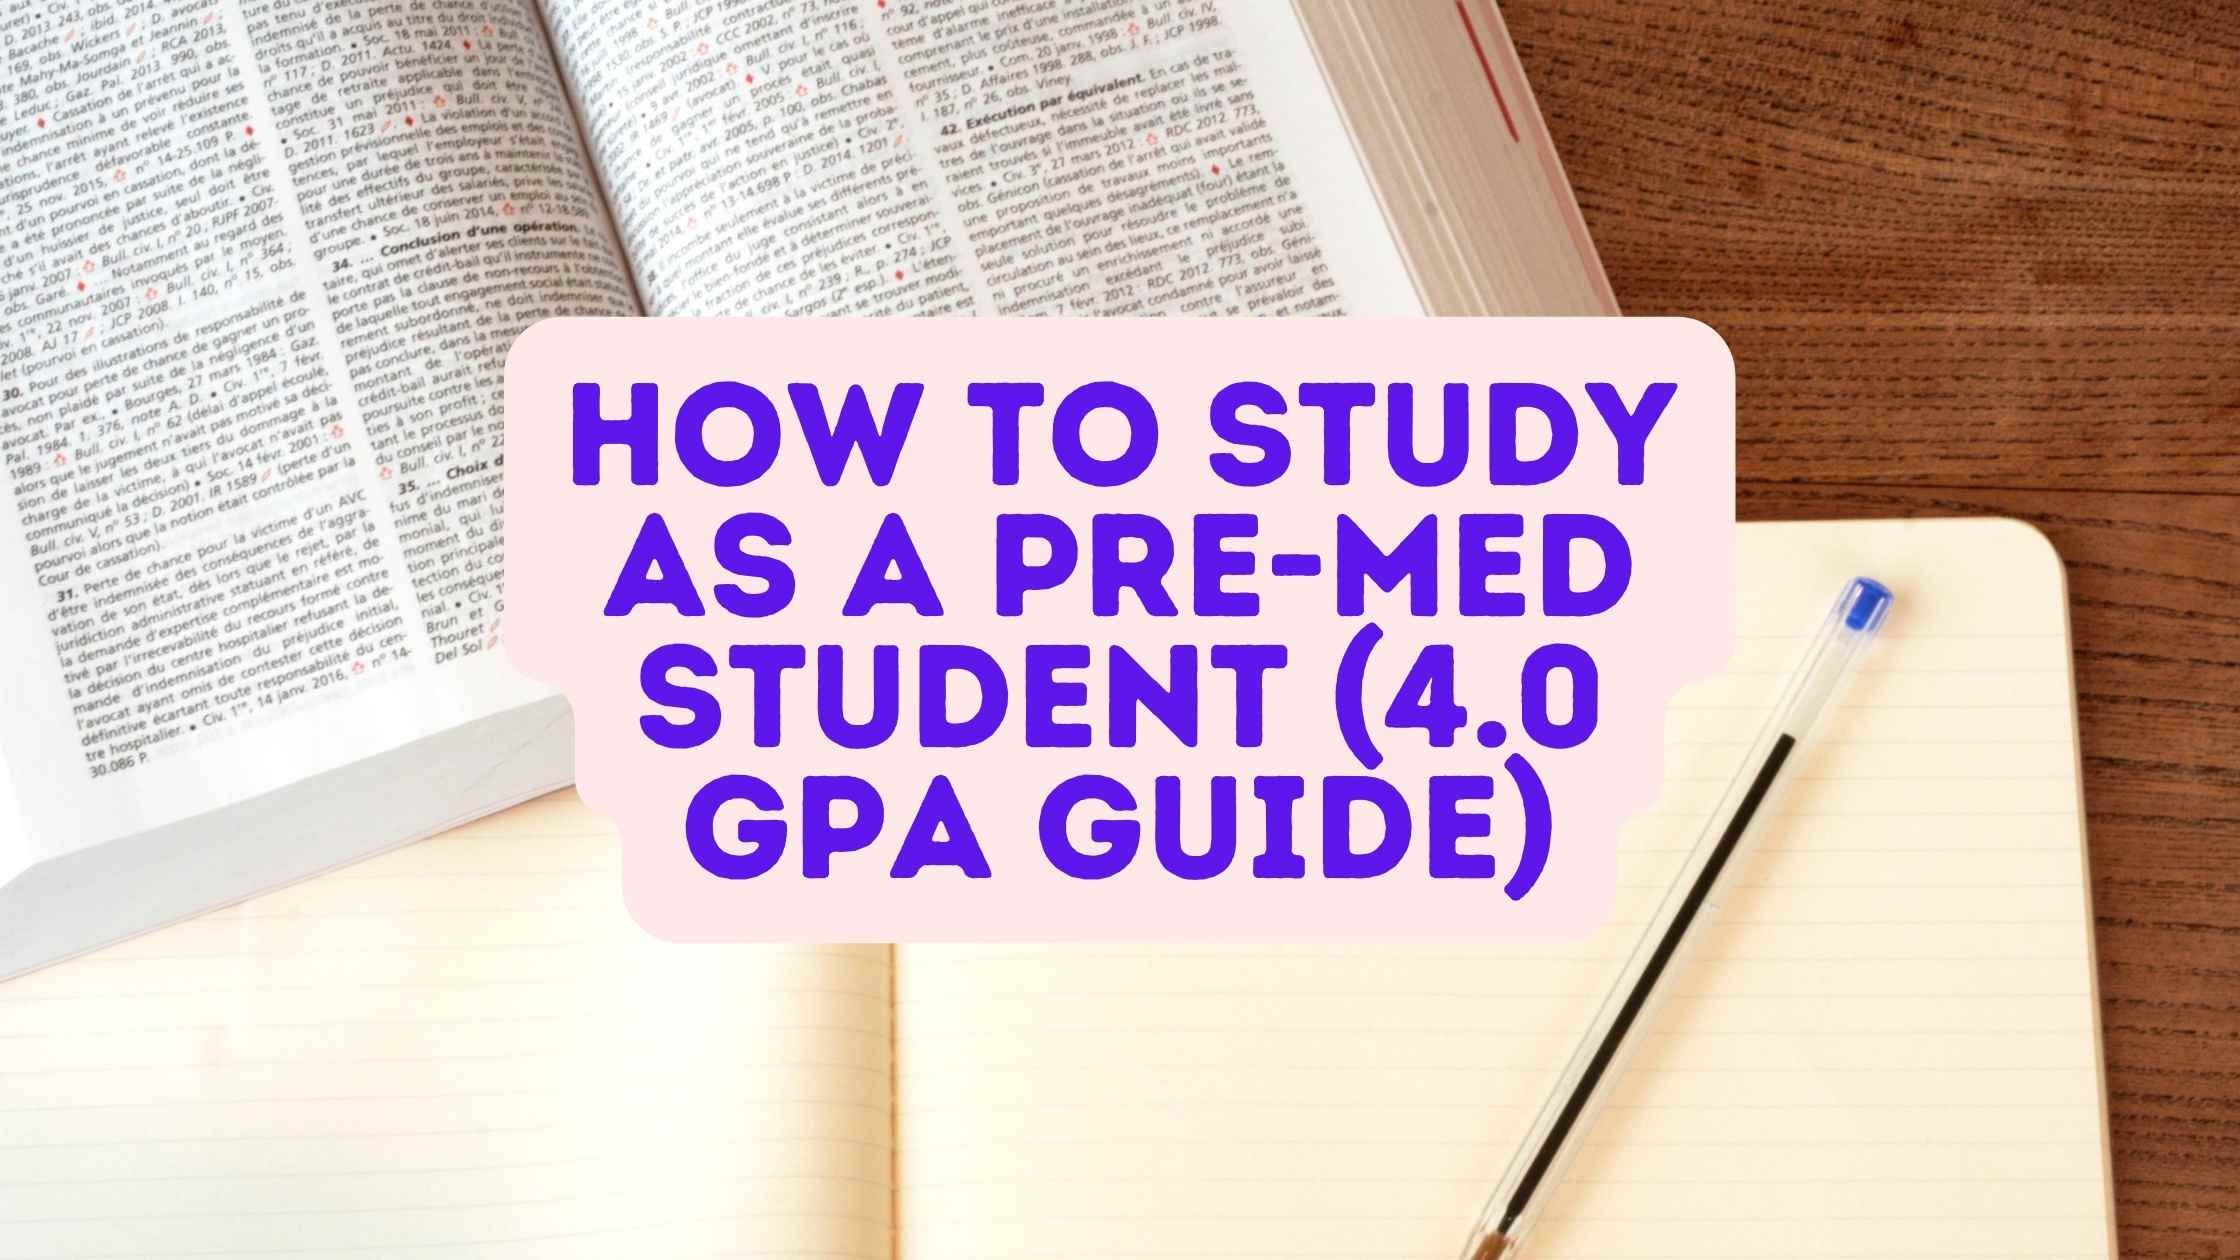 How To Study As A Pre-med Student (4.0 GPA Guide)